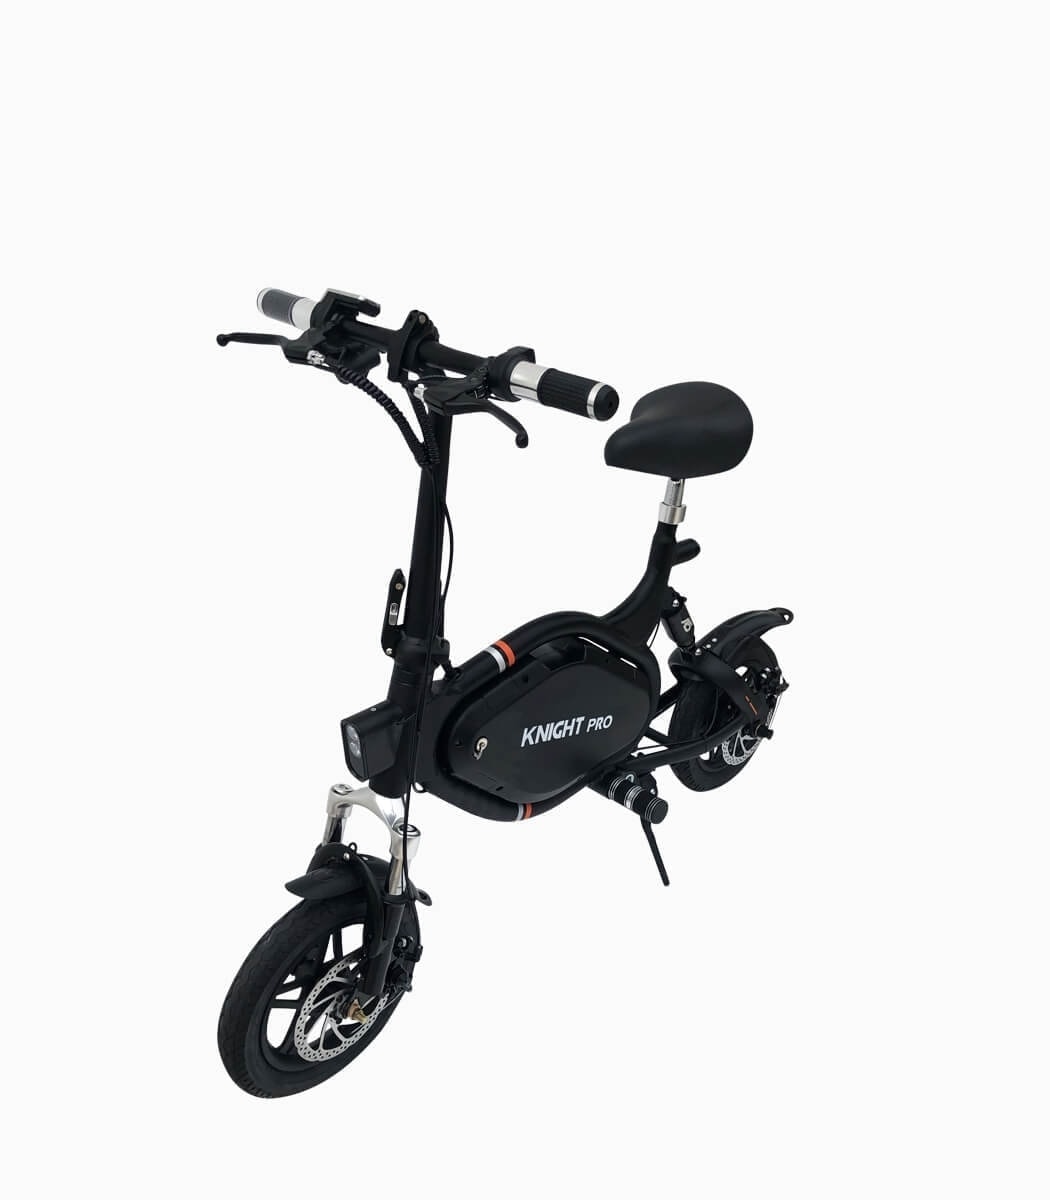 KNIGHT PRO (BLACK17.5AH) UL2272 certified electric scooter top angled left V1